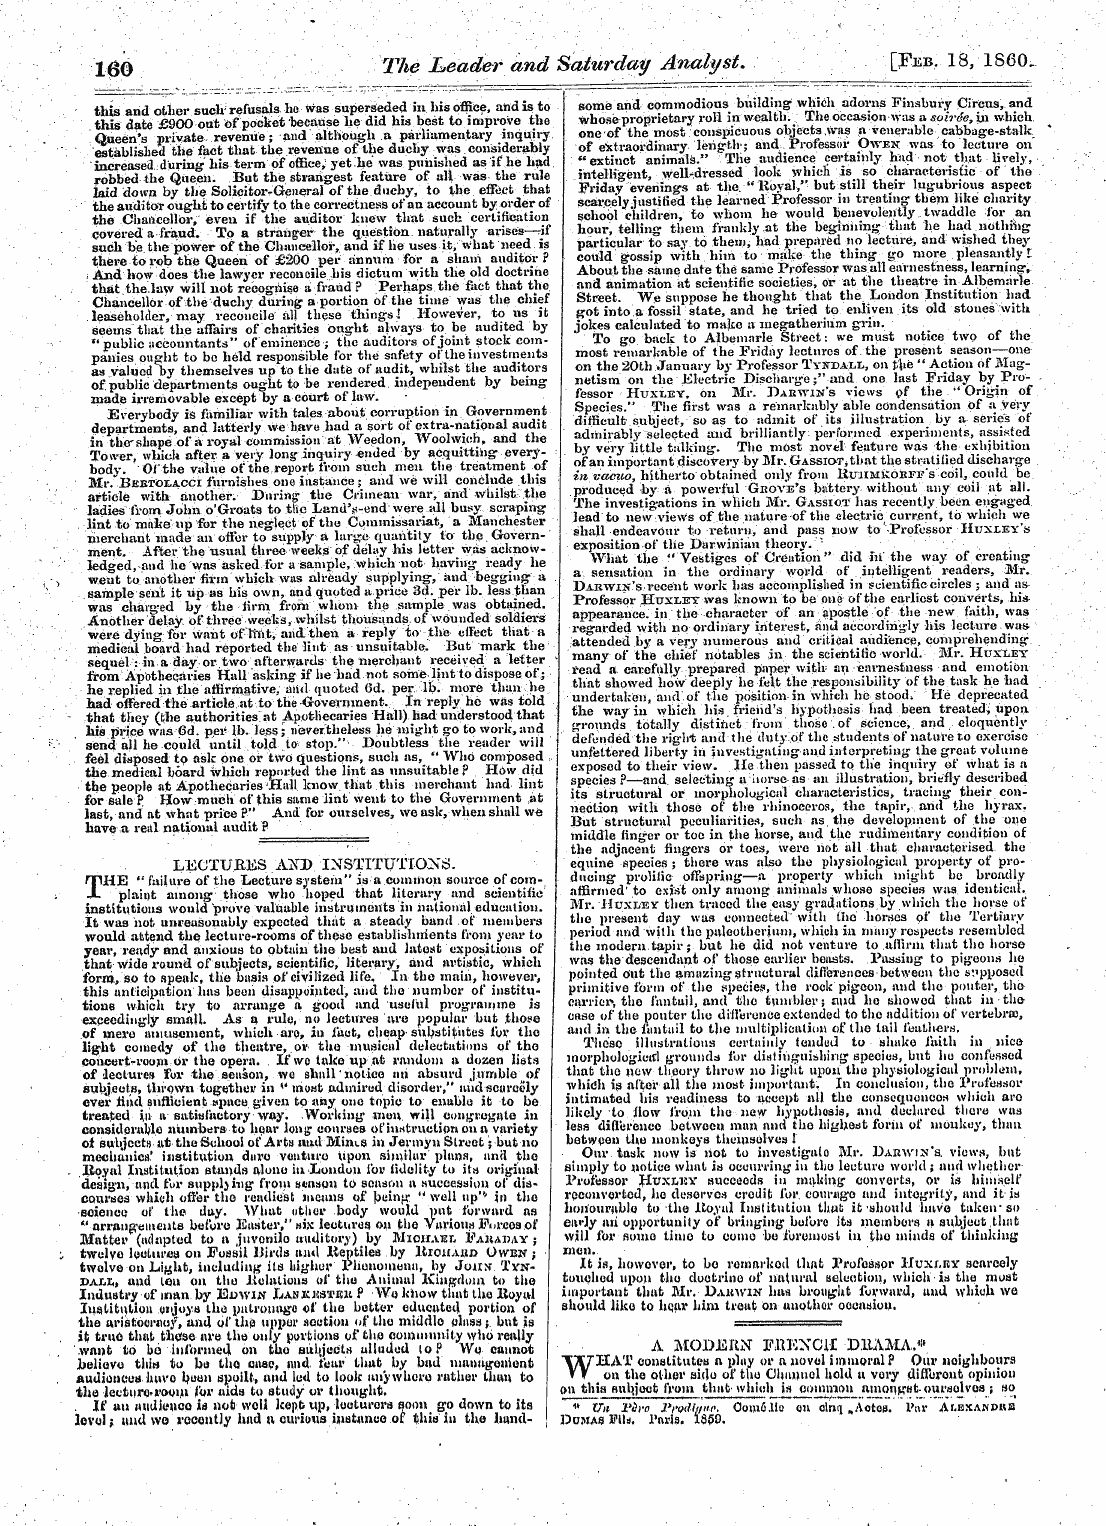 Leader (1850-1860): jS F Y, 2nd edition: 12